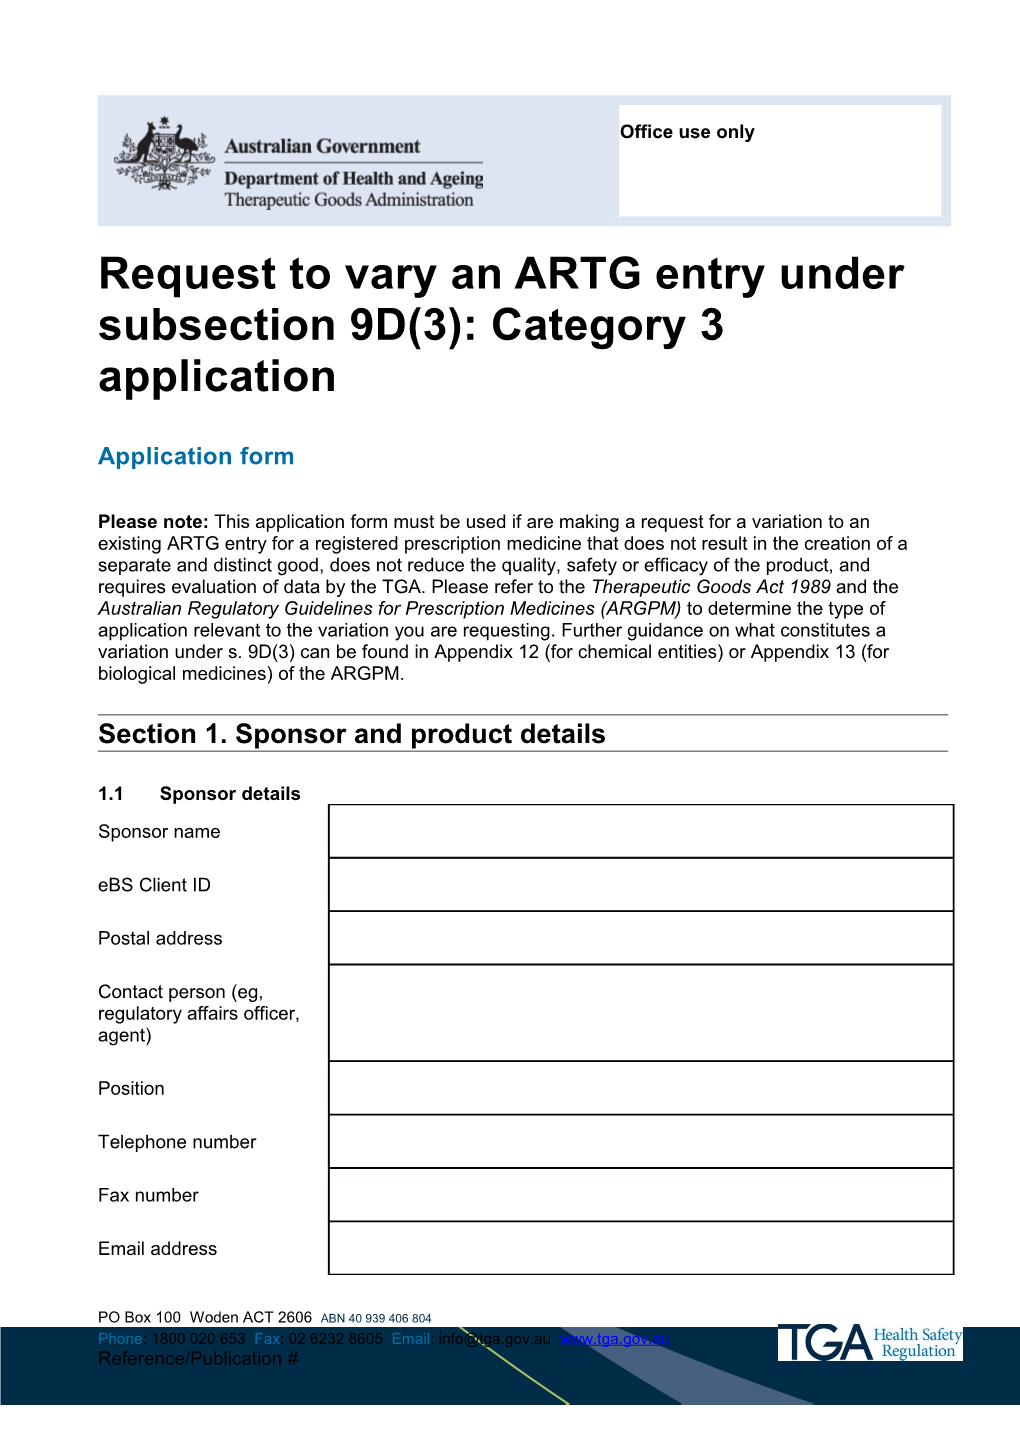 Request to Vary an ARTG Entry Under Subsection 9D(3): Category 3 Application